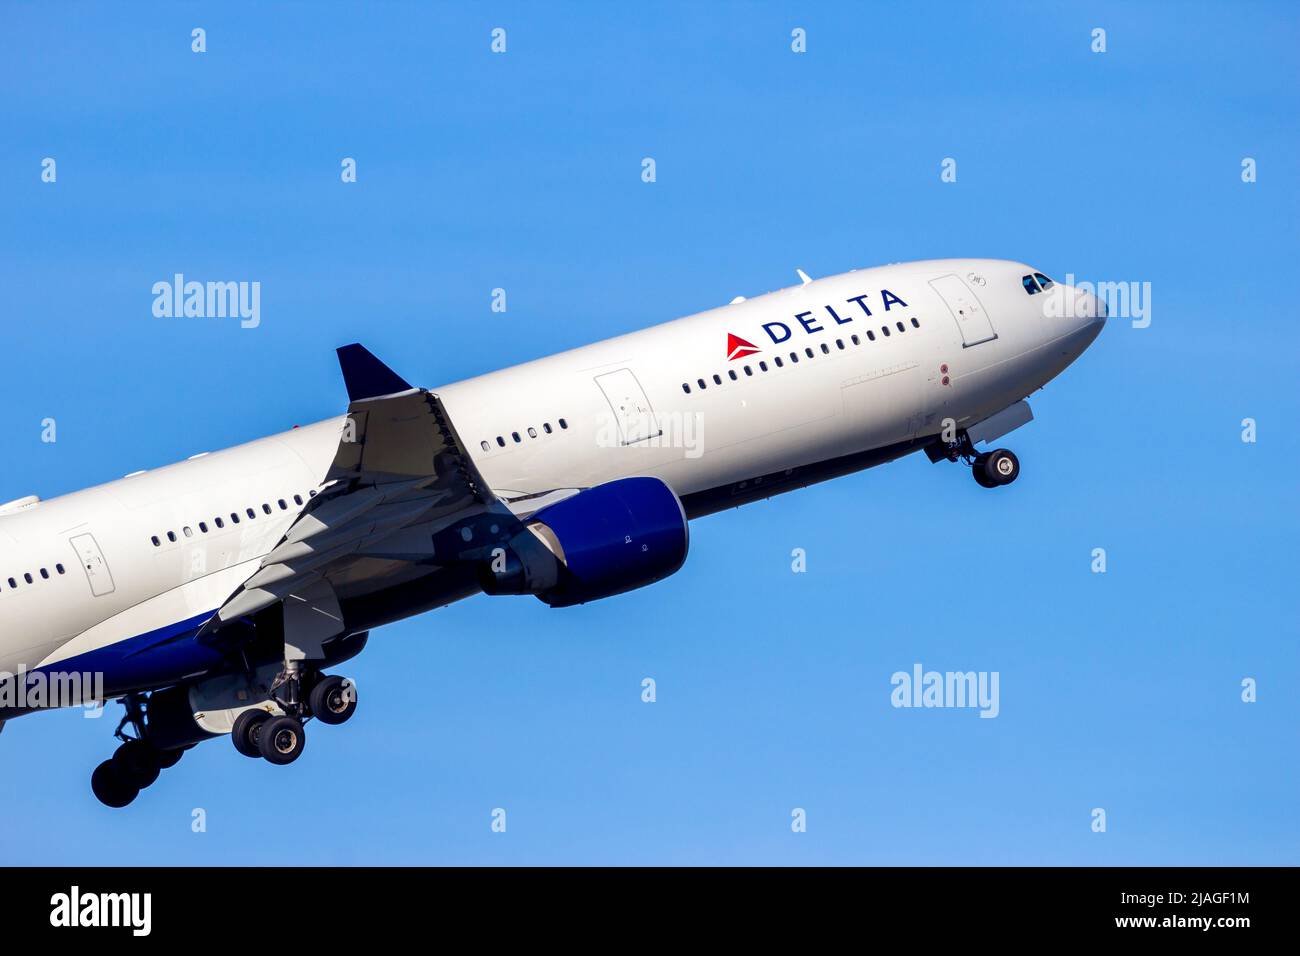 Delta Air Lines Airbus A330 passenger plane taking off from Schiphol Airport. The Netherlands - February 16, 2016 Stock Photo